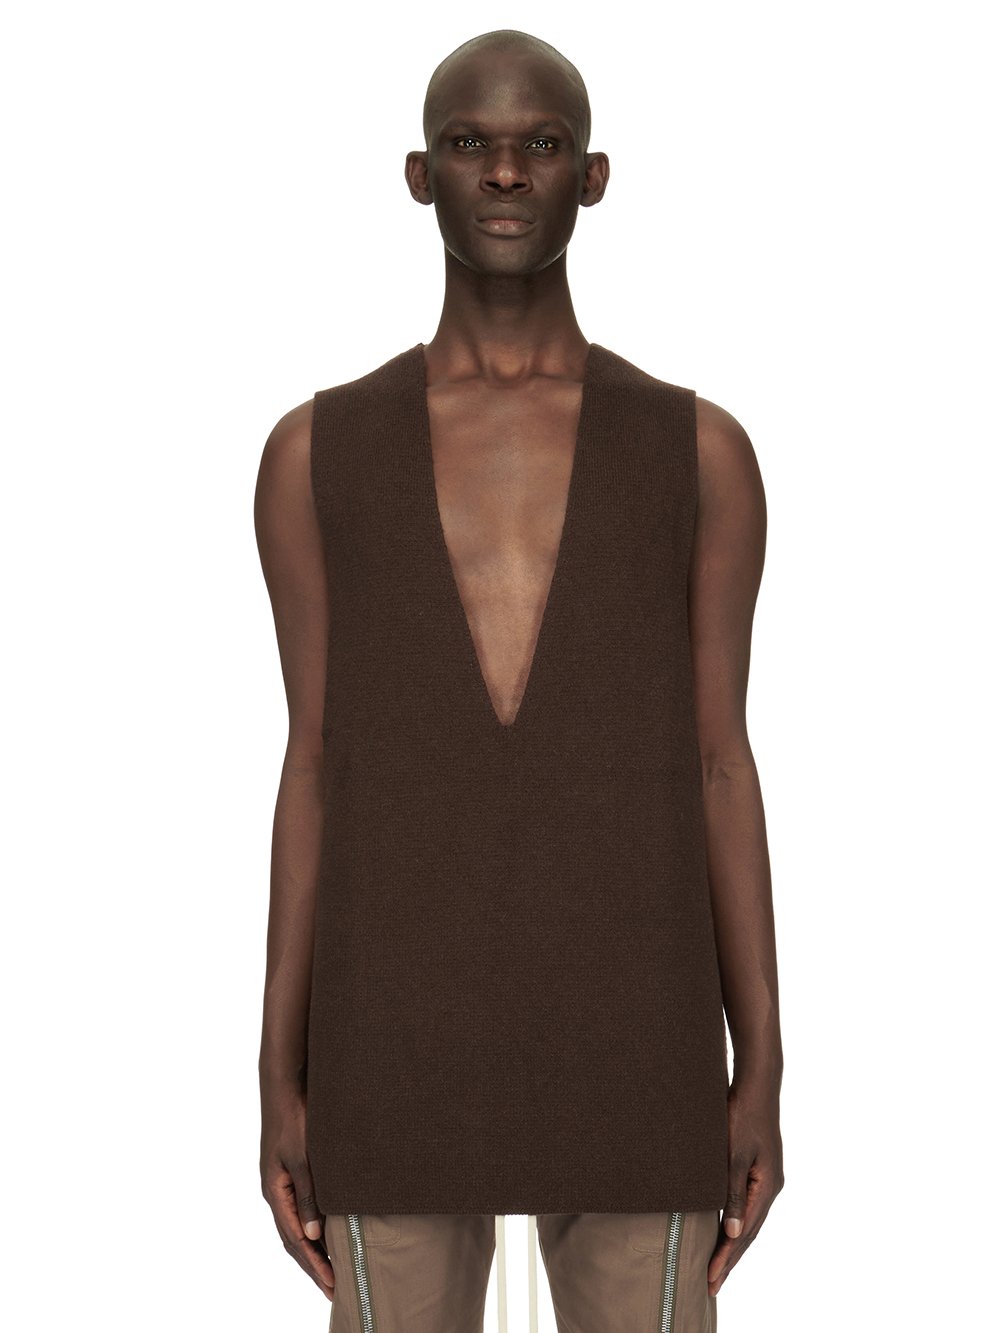 RICK OWENS FW23 LUXOR RUNWAY V TANK IN BROWN RECYCLED CASHMERE